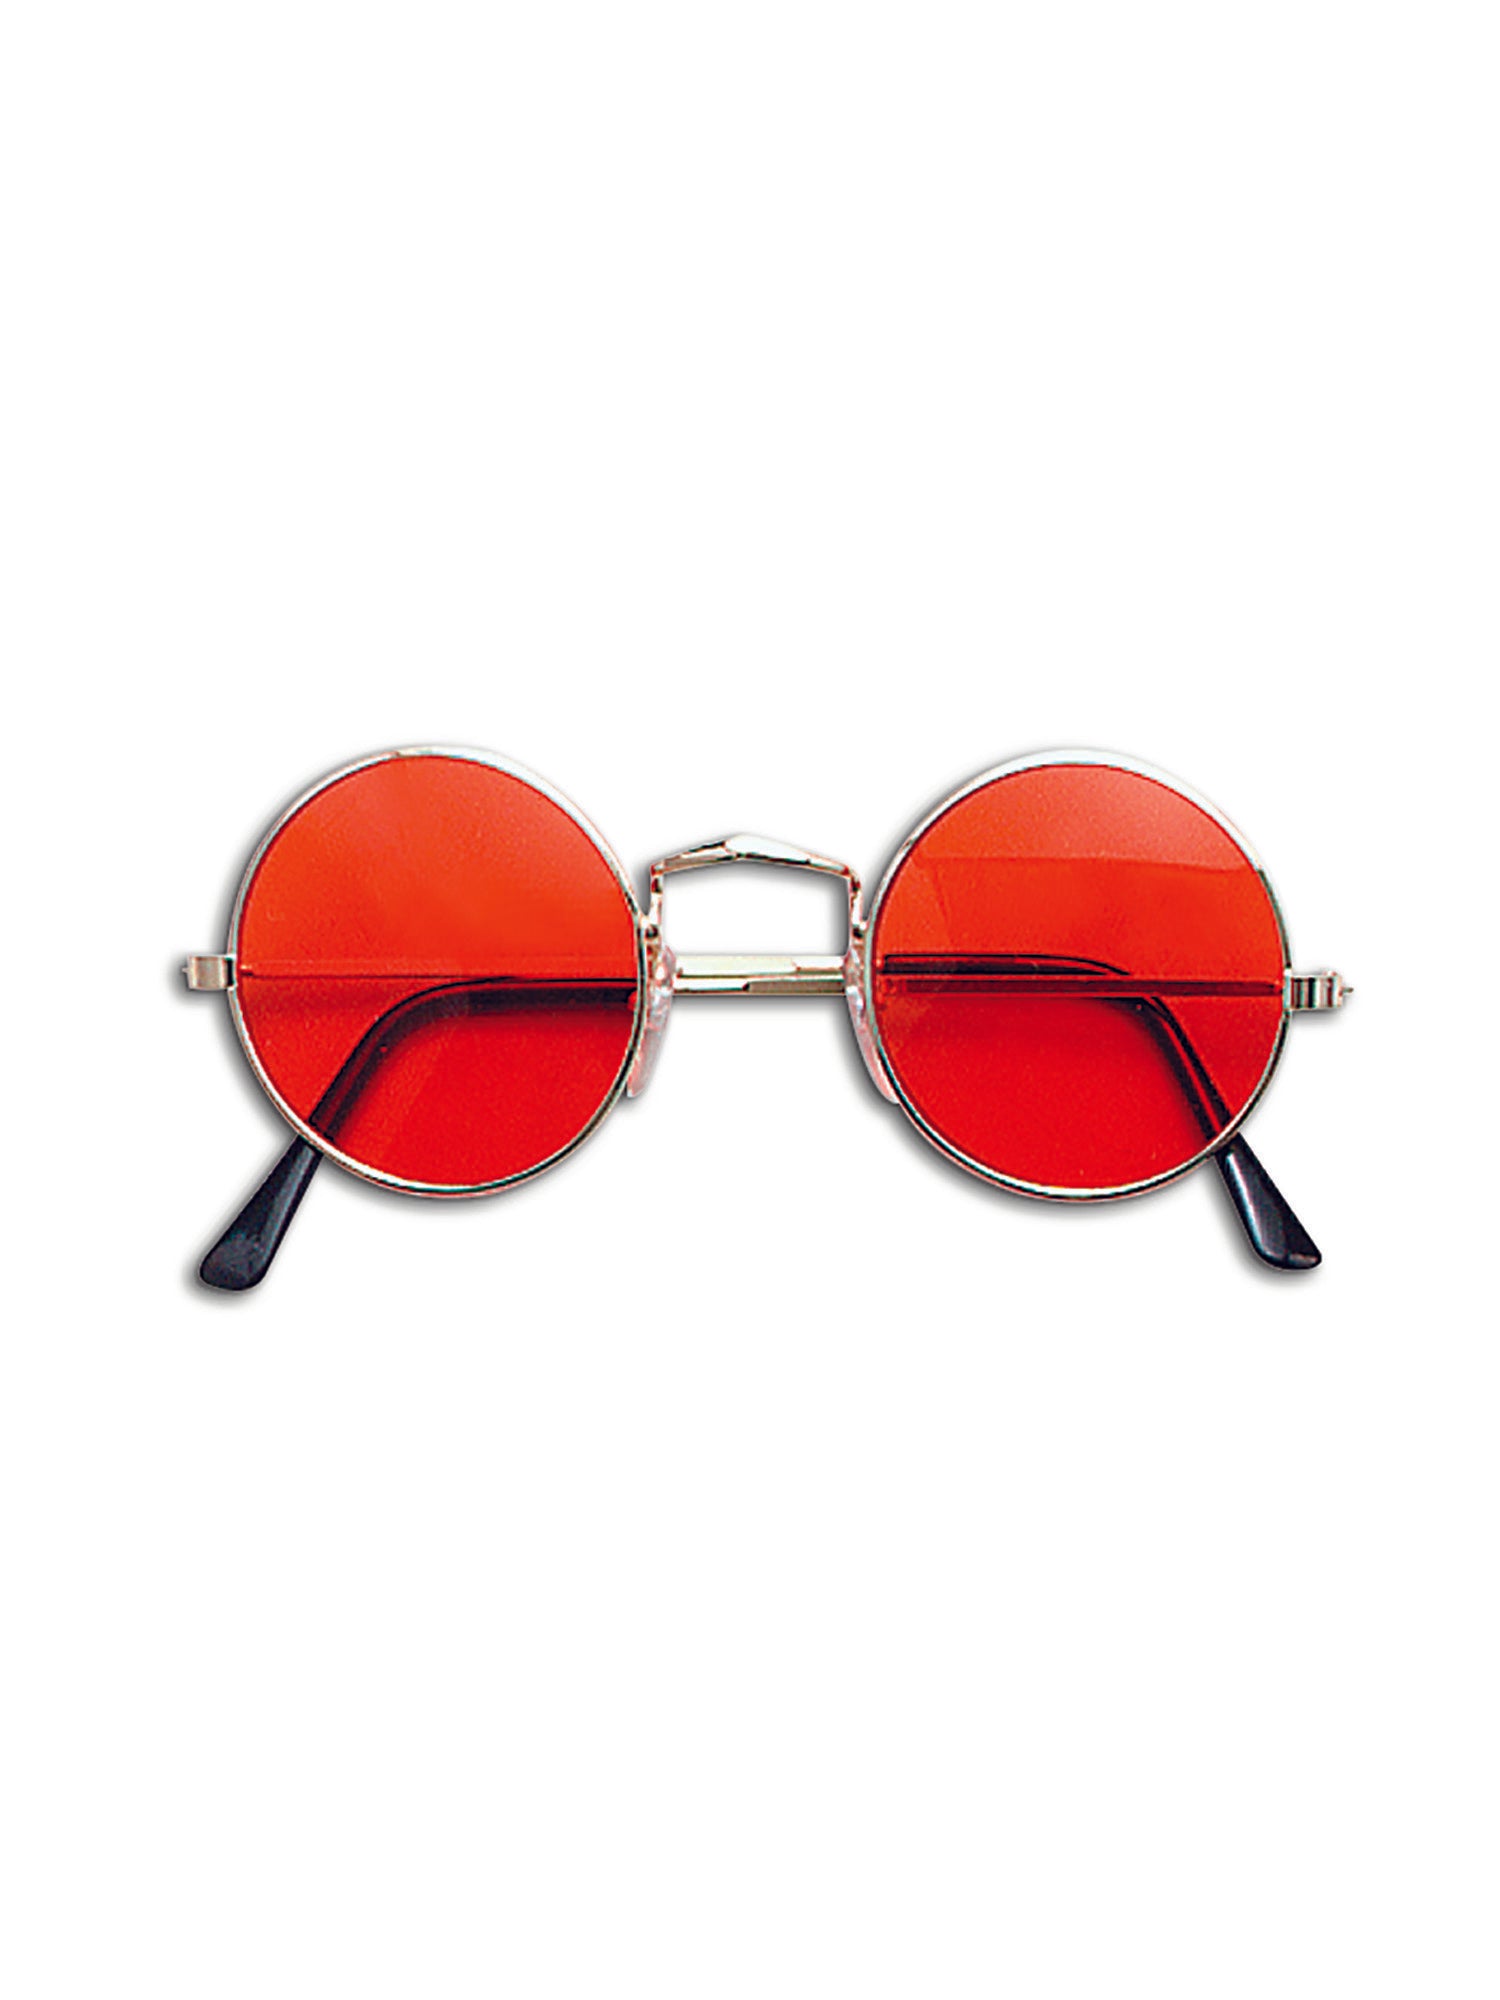 Glasses, Orange, Generic, Accessories, One Size, Front